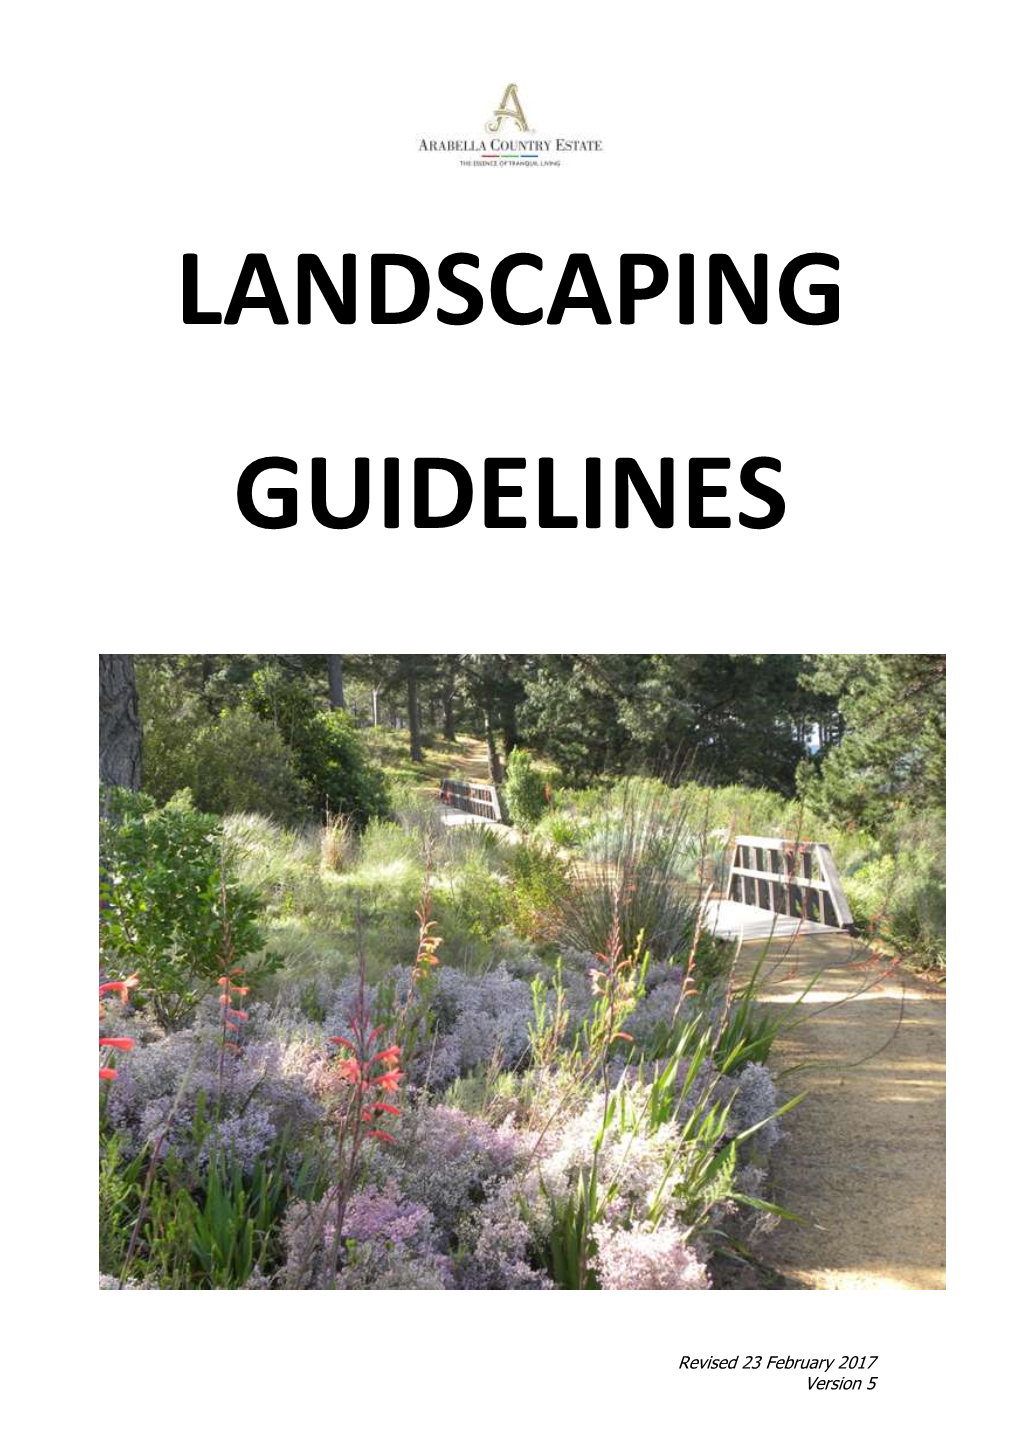 Building Guidelines Apply to Landscaping Contractors As Well